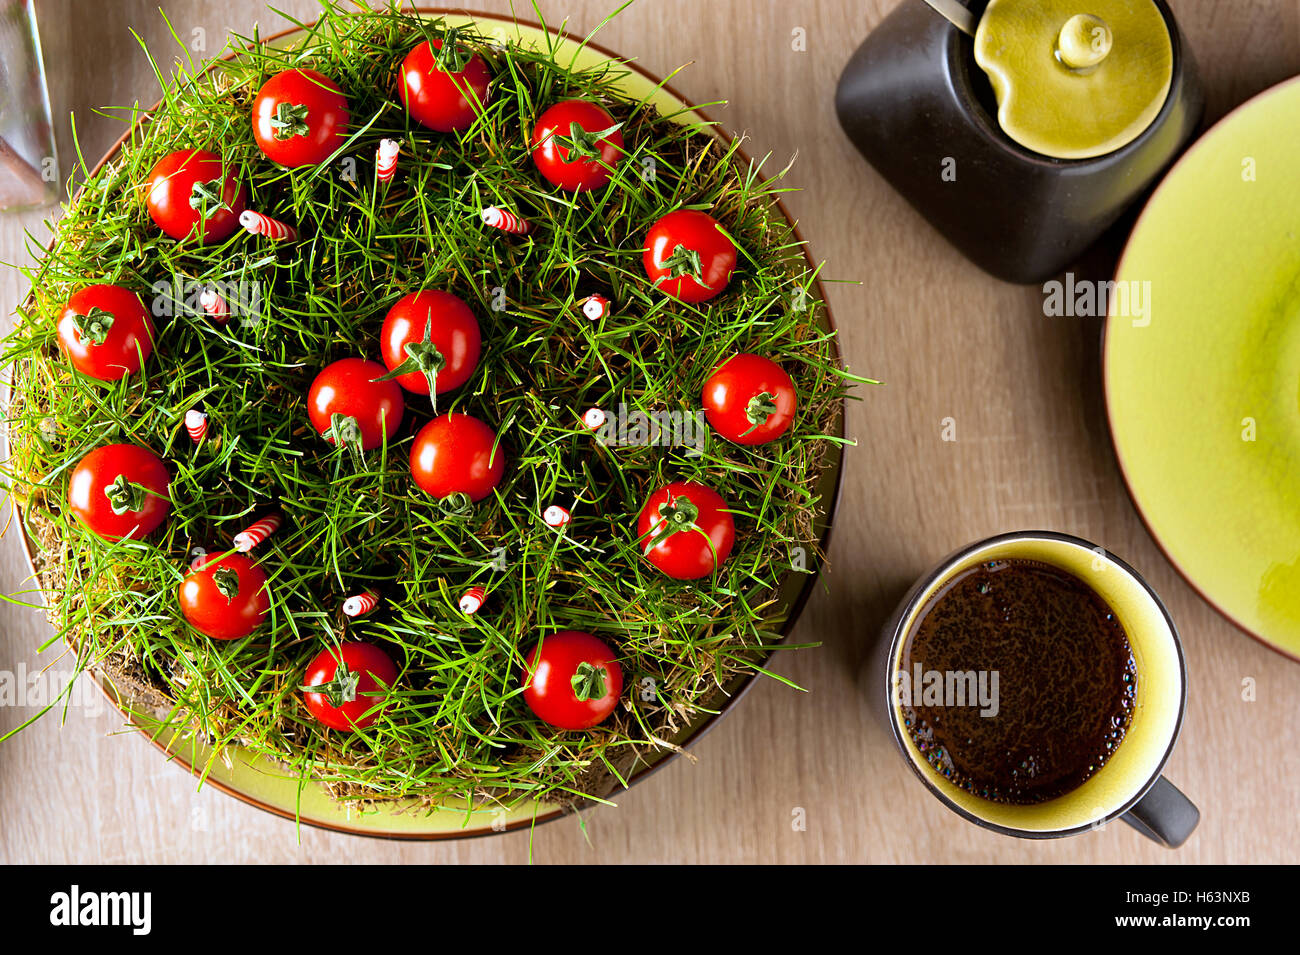 An improvised garden cake made from ground, grass, candles and cherry tomatoes. Stock Photo